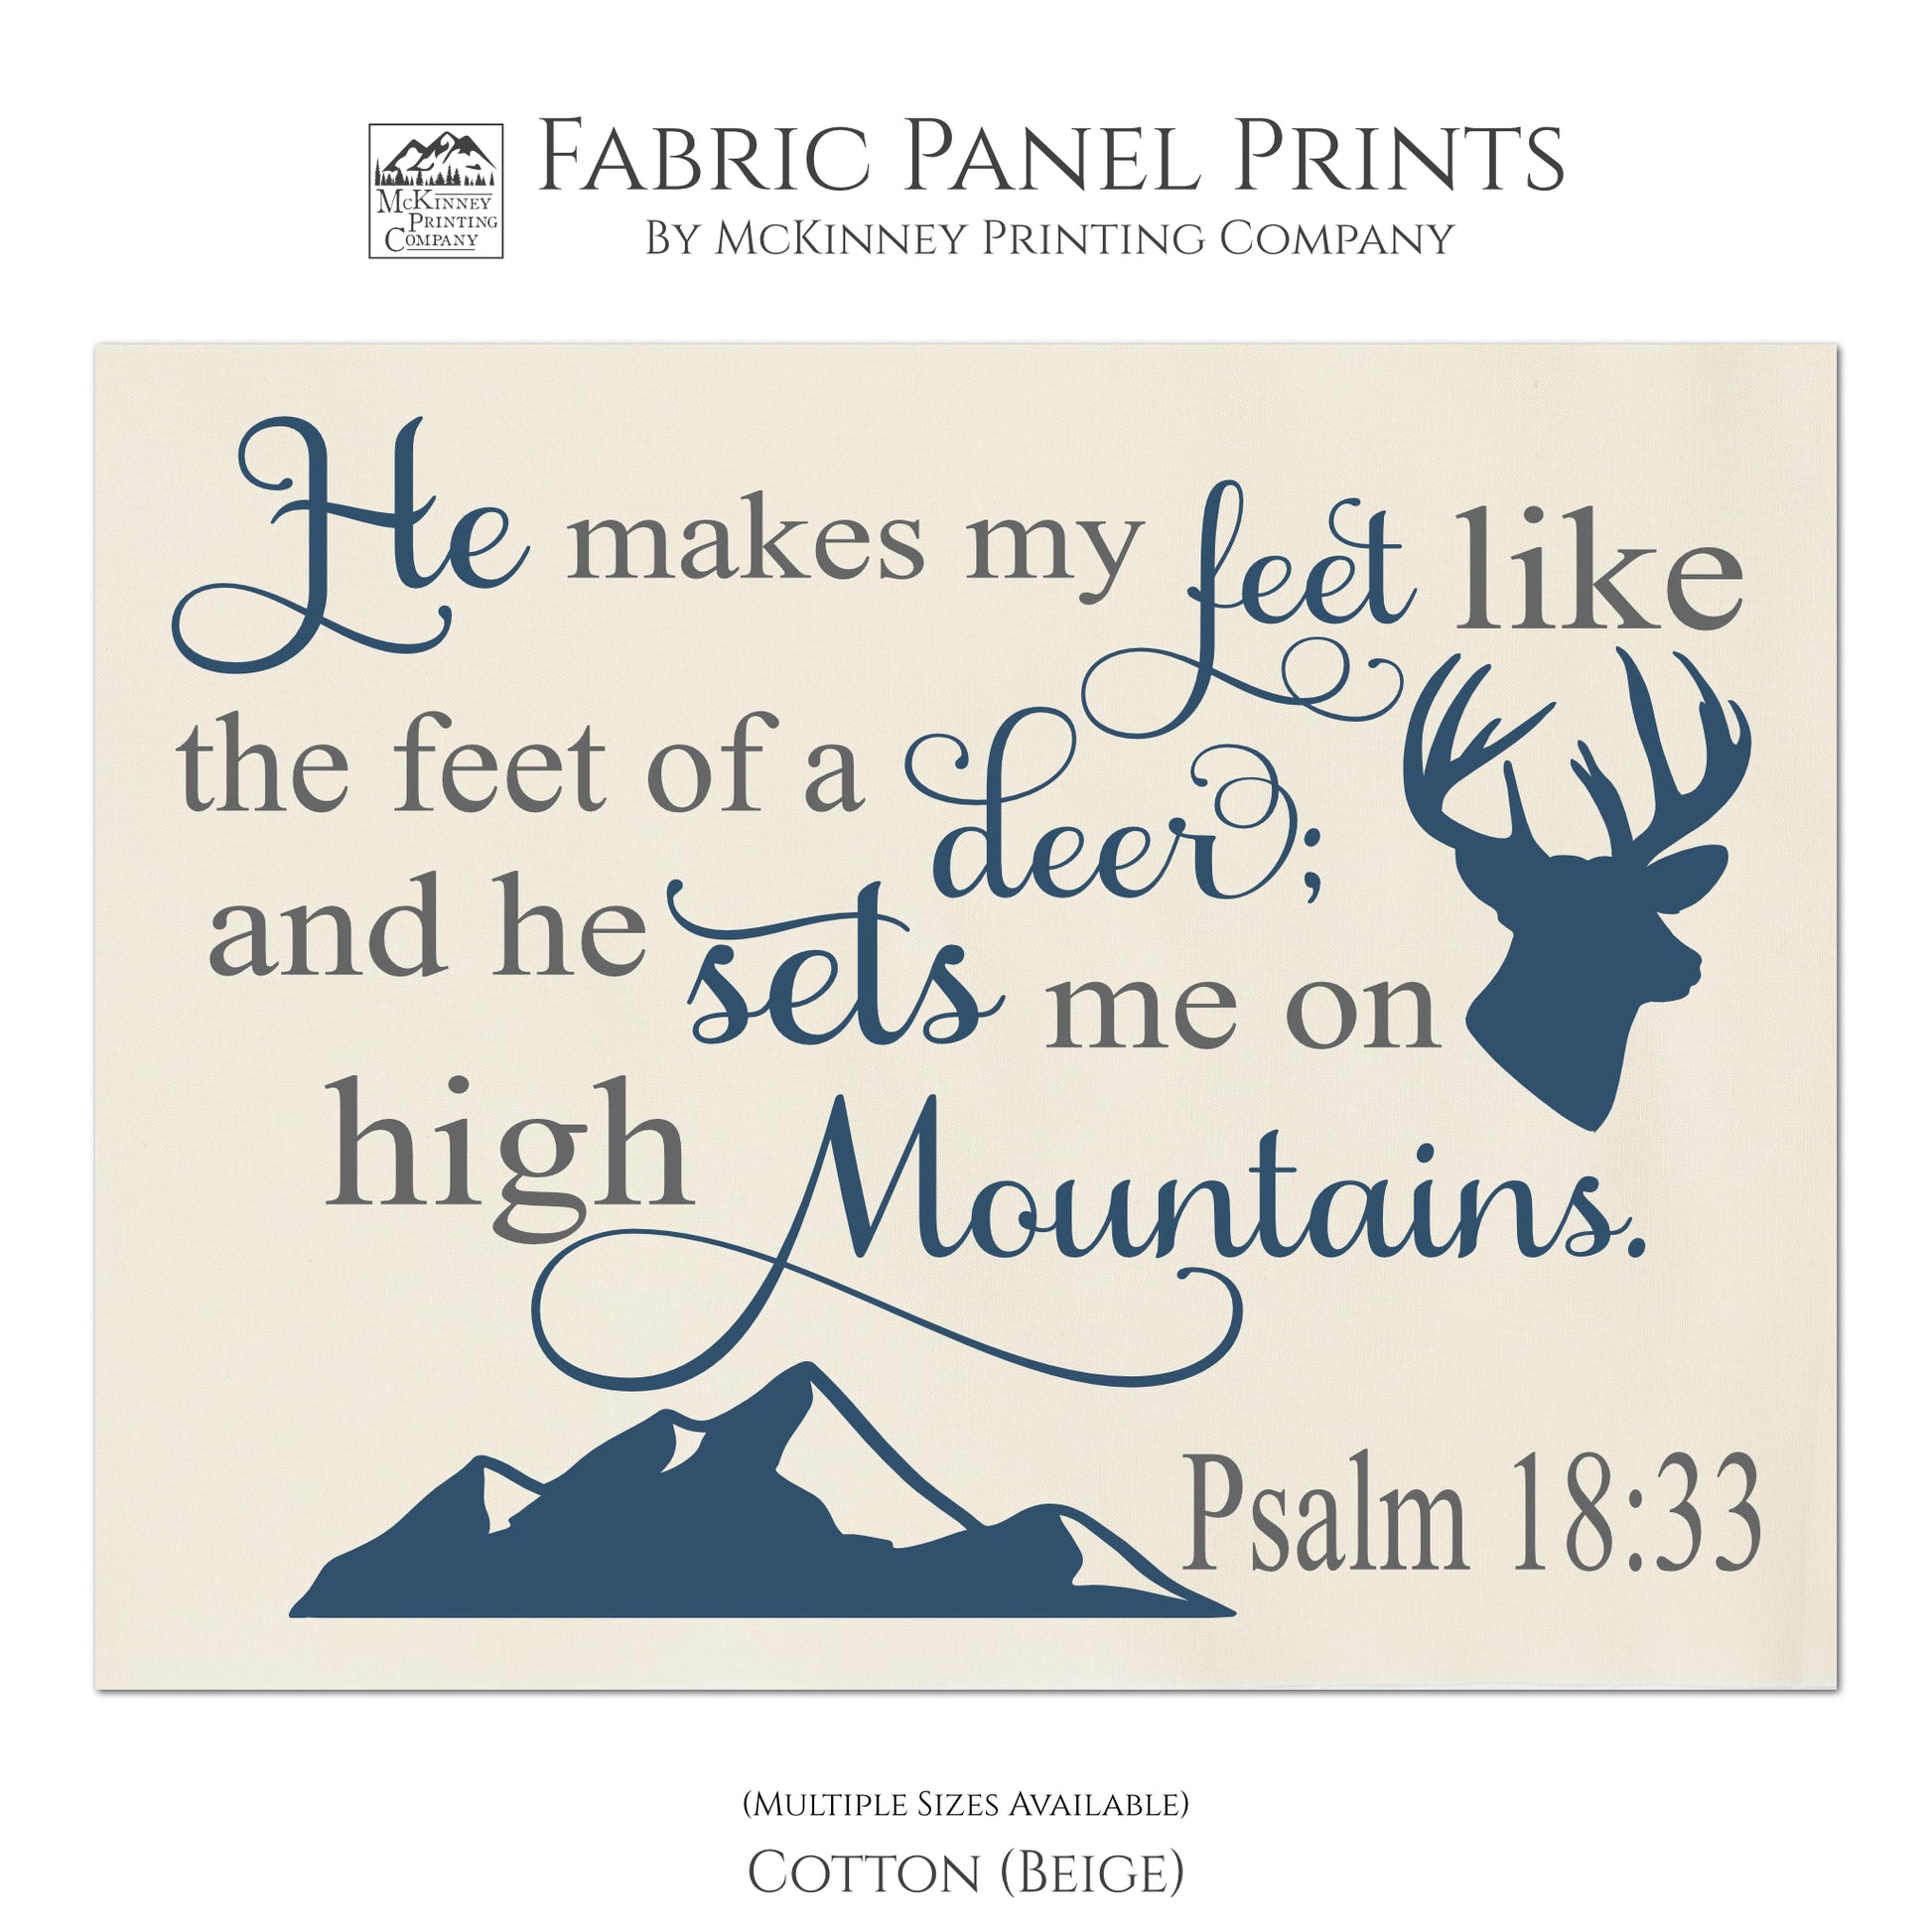 He makes my feet like the feet of a deer; and he sets me on high mountains - Psalm 18:33 - Christian Fabric Panel Print, Quilt Block, Scripture Fabric - Cotton